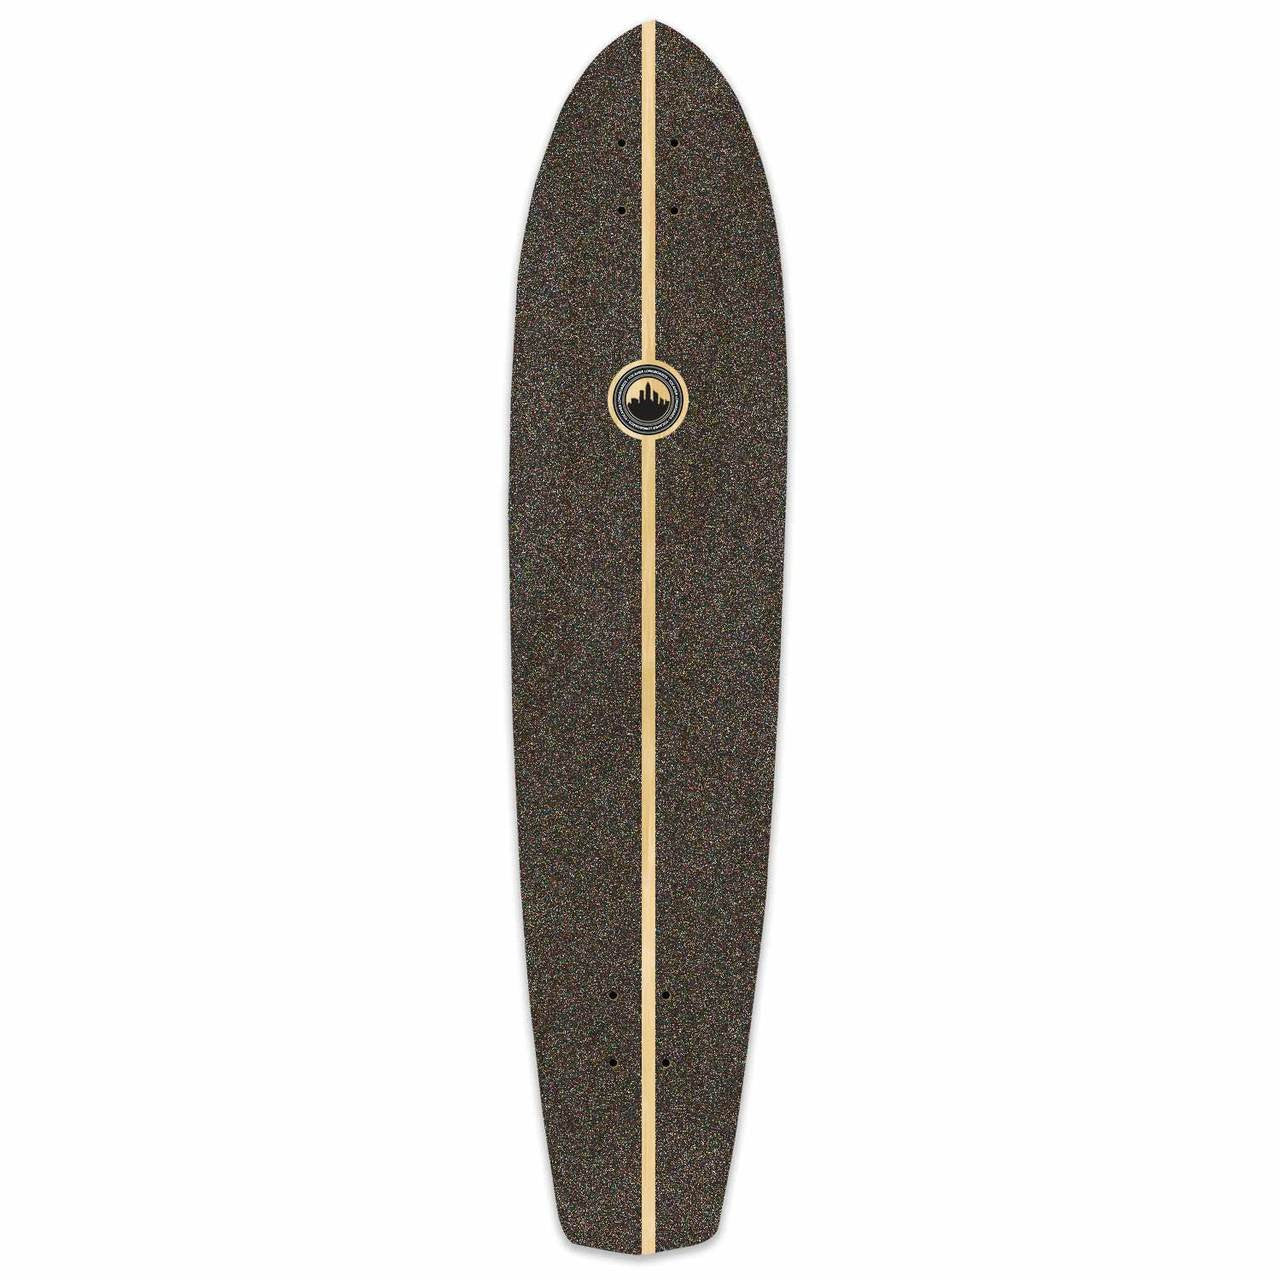 Yocaher Slimkick Longboard Deck - Stained Red